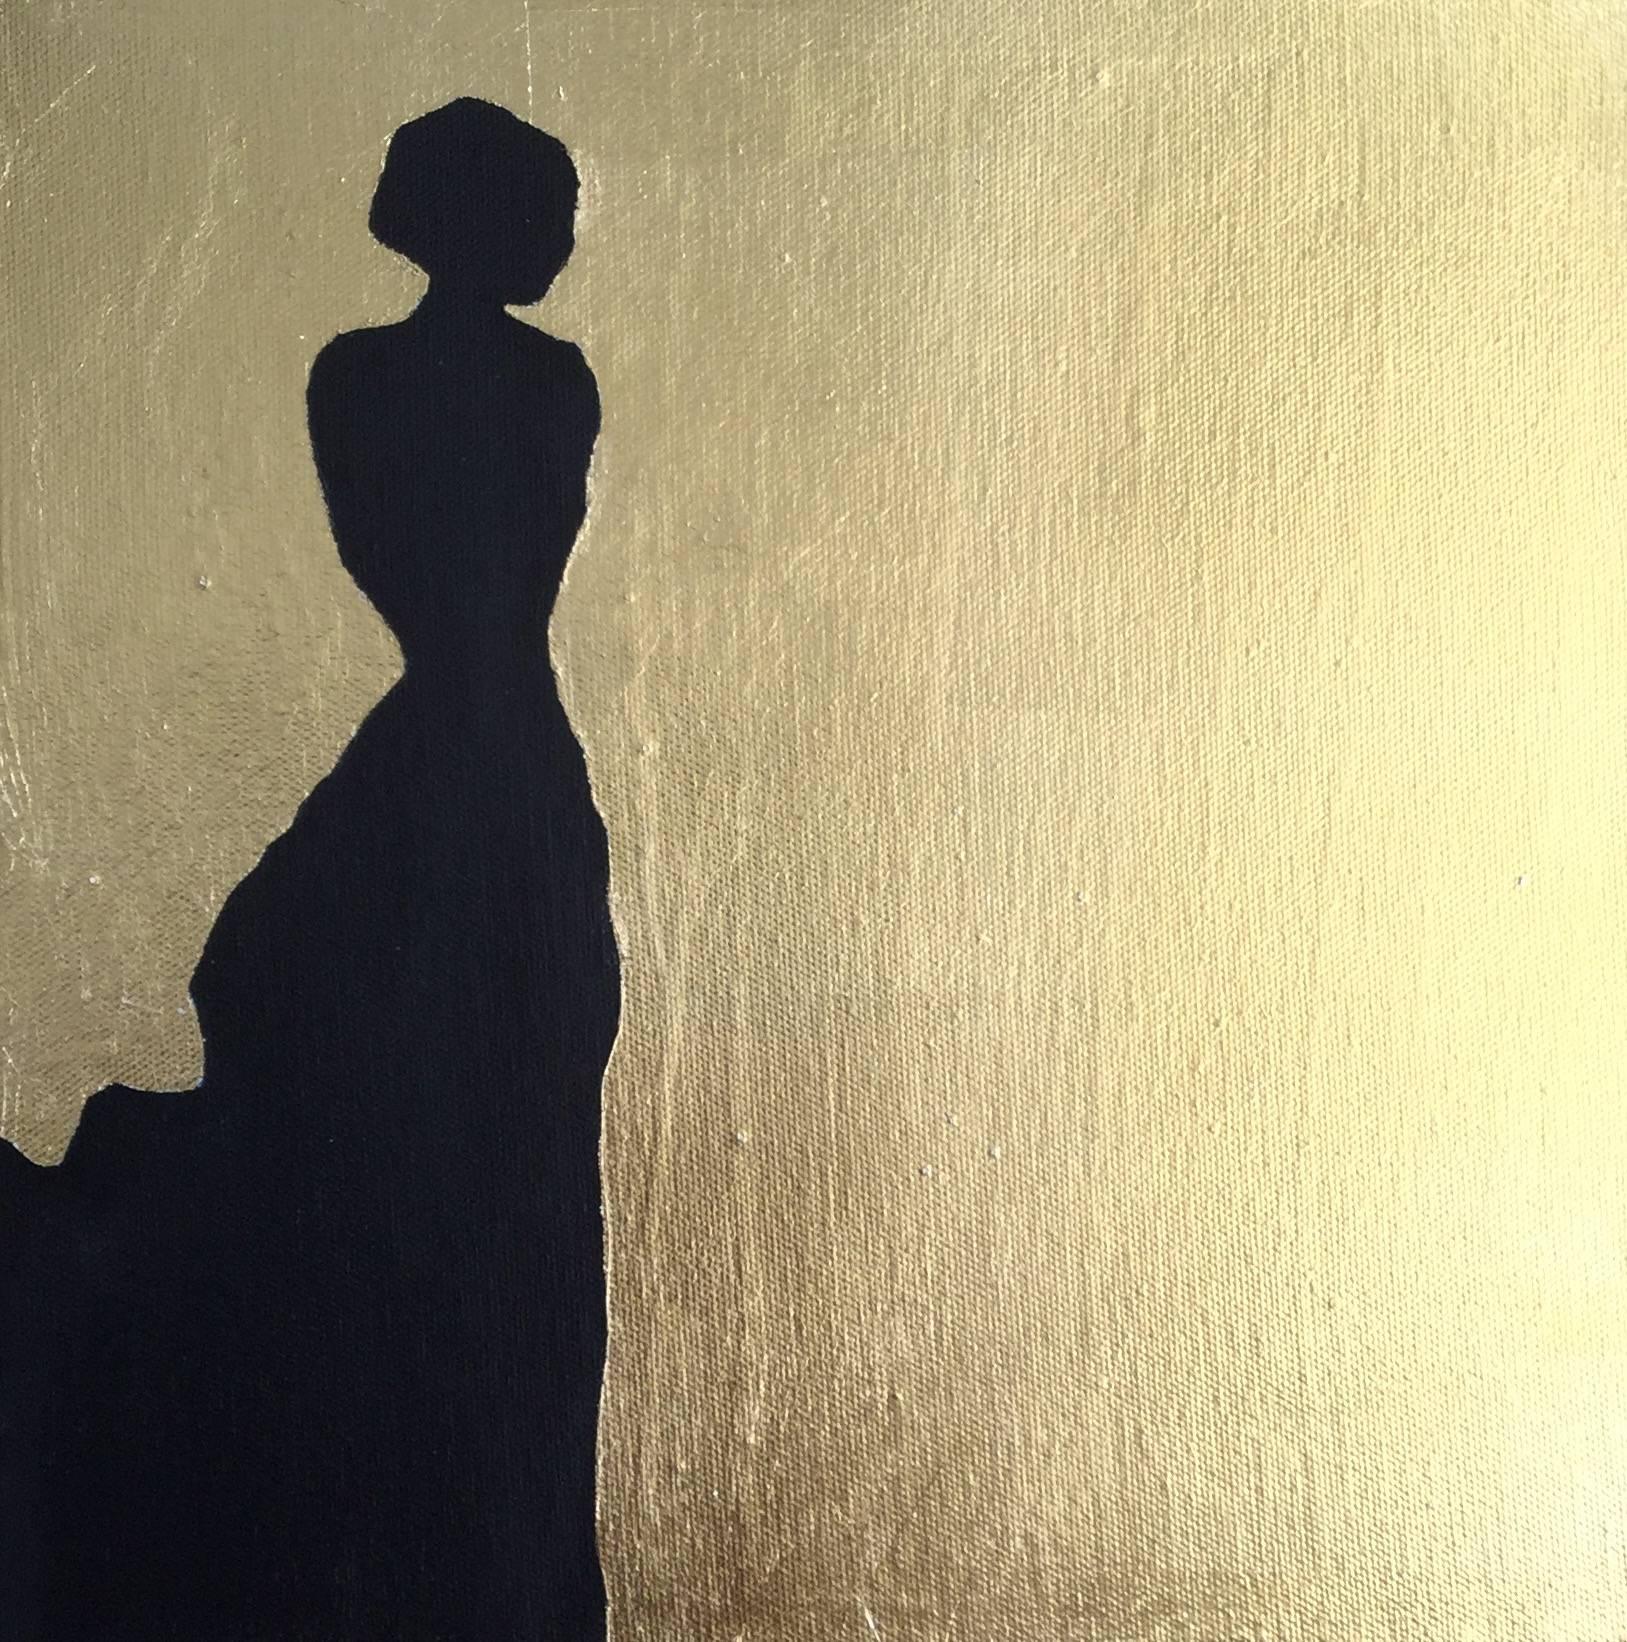 Silhouette, 4 paintings - Gold Portrait Painting by K. Odal